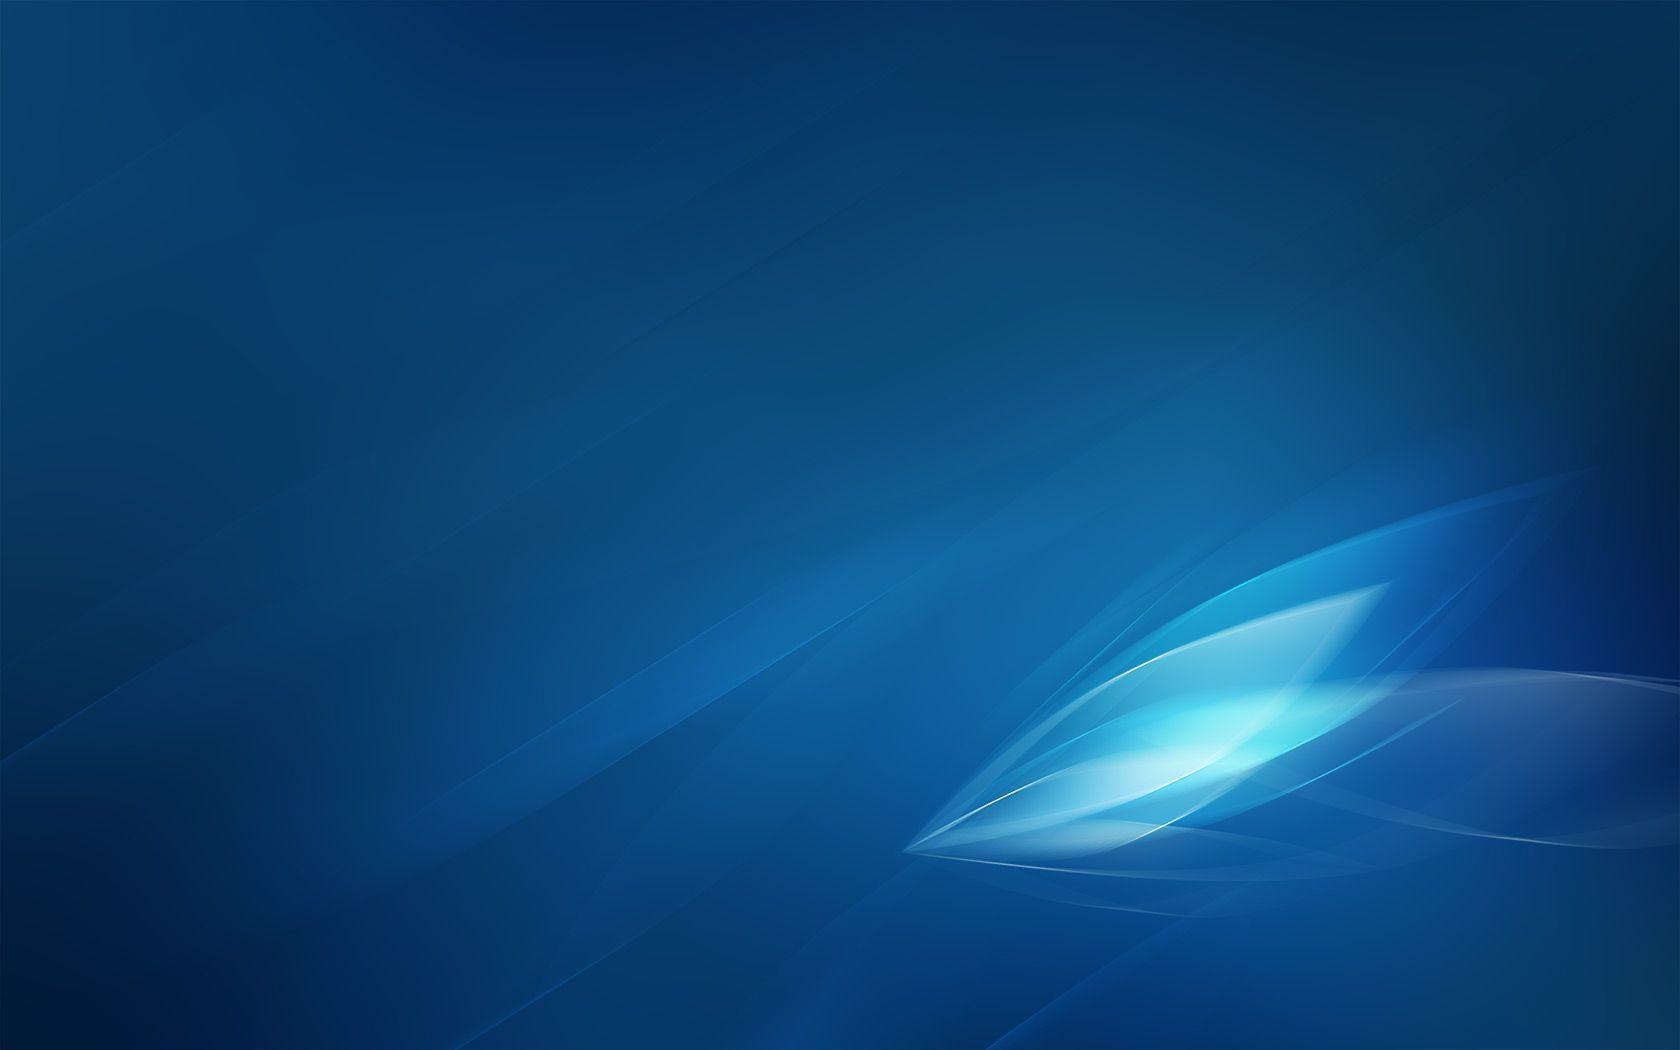 Blue Abstract more Beautiful background image for video at